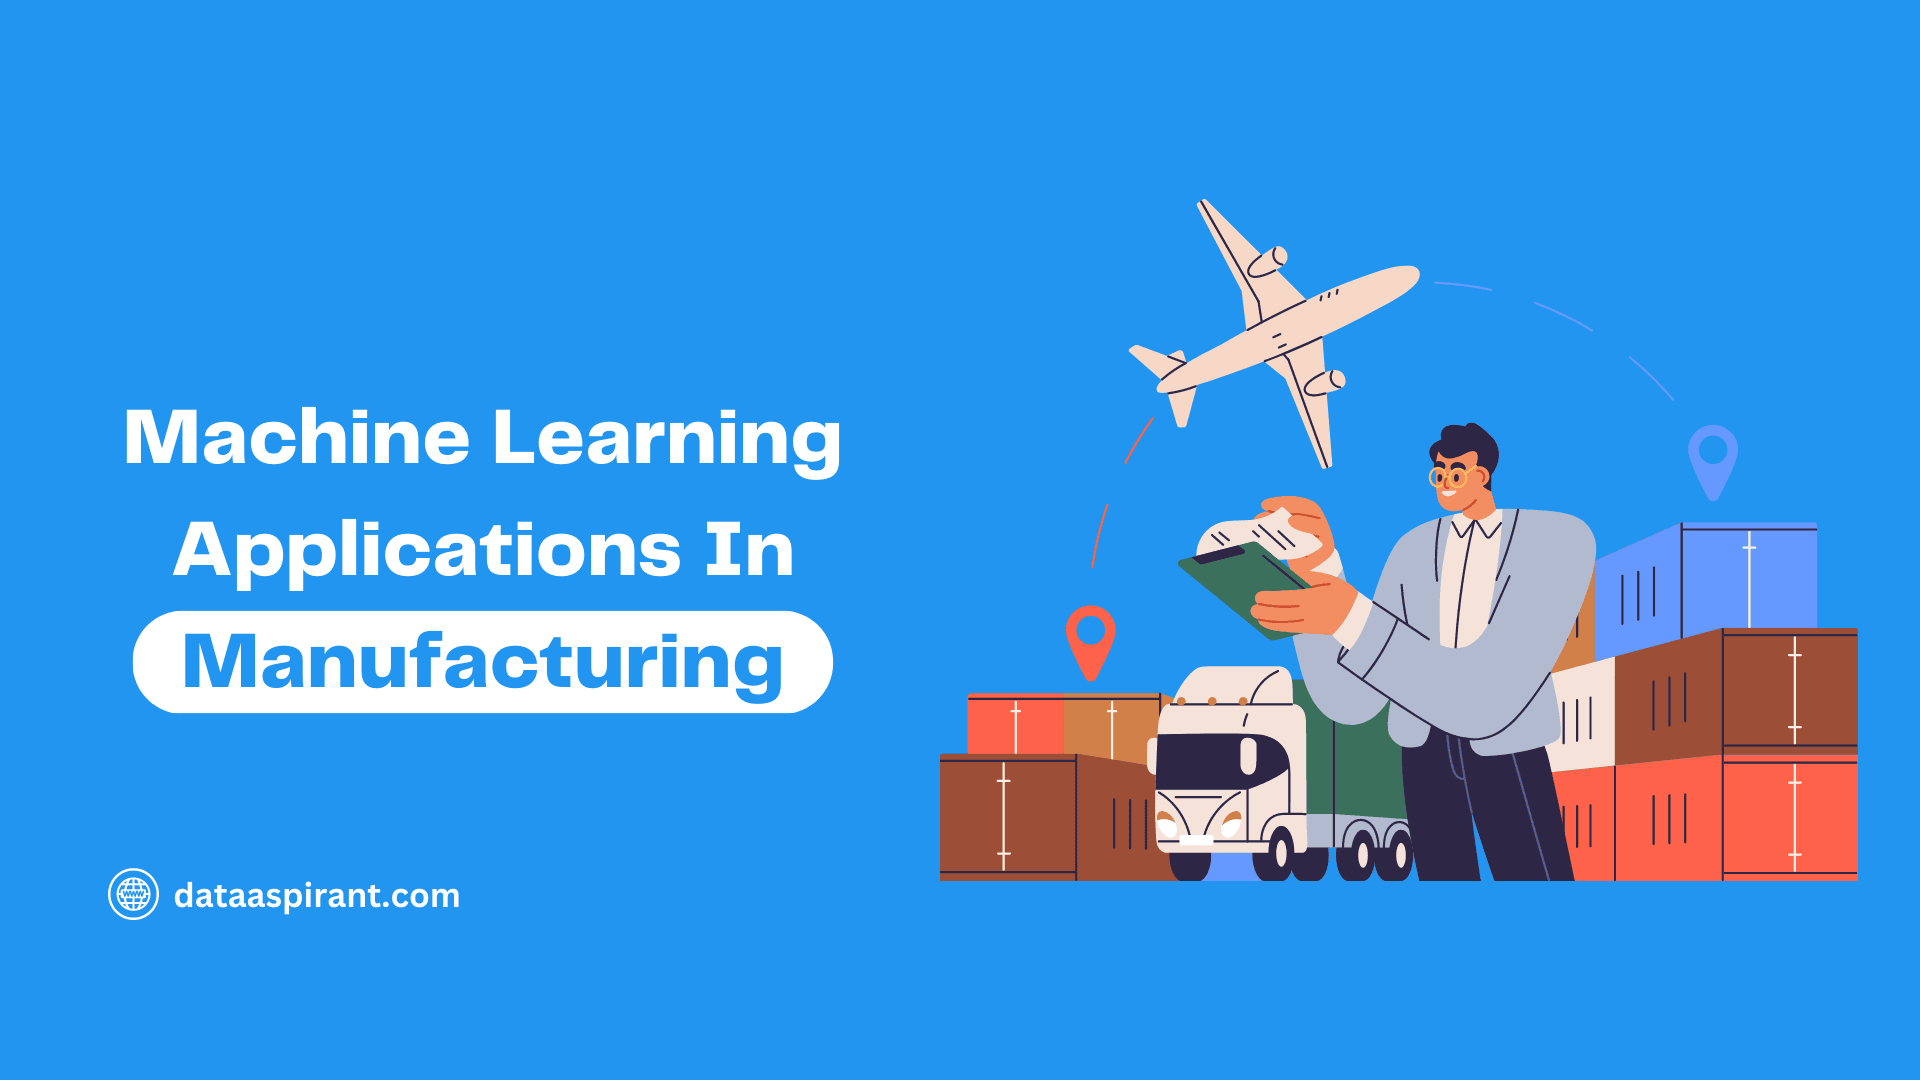 Machine Learning applications in Manufacturing